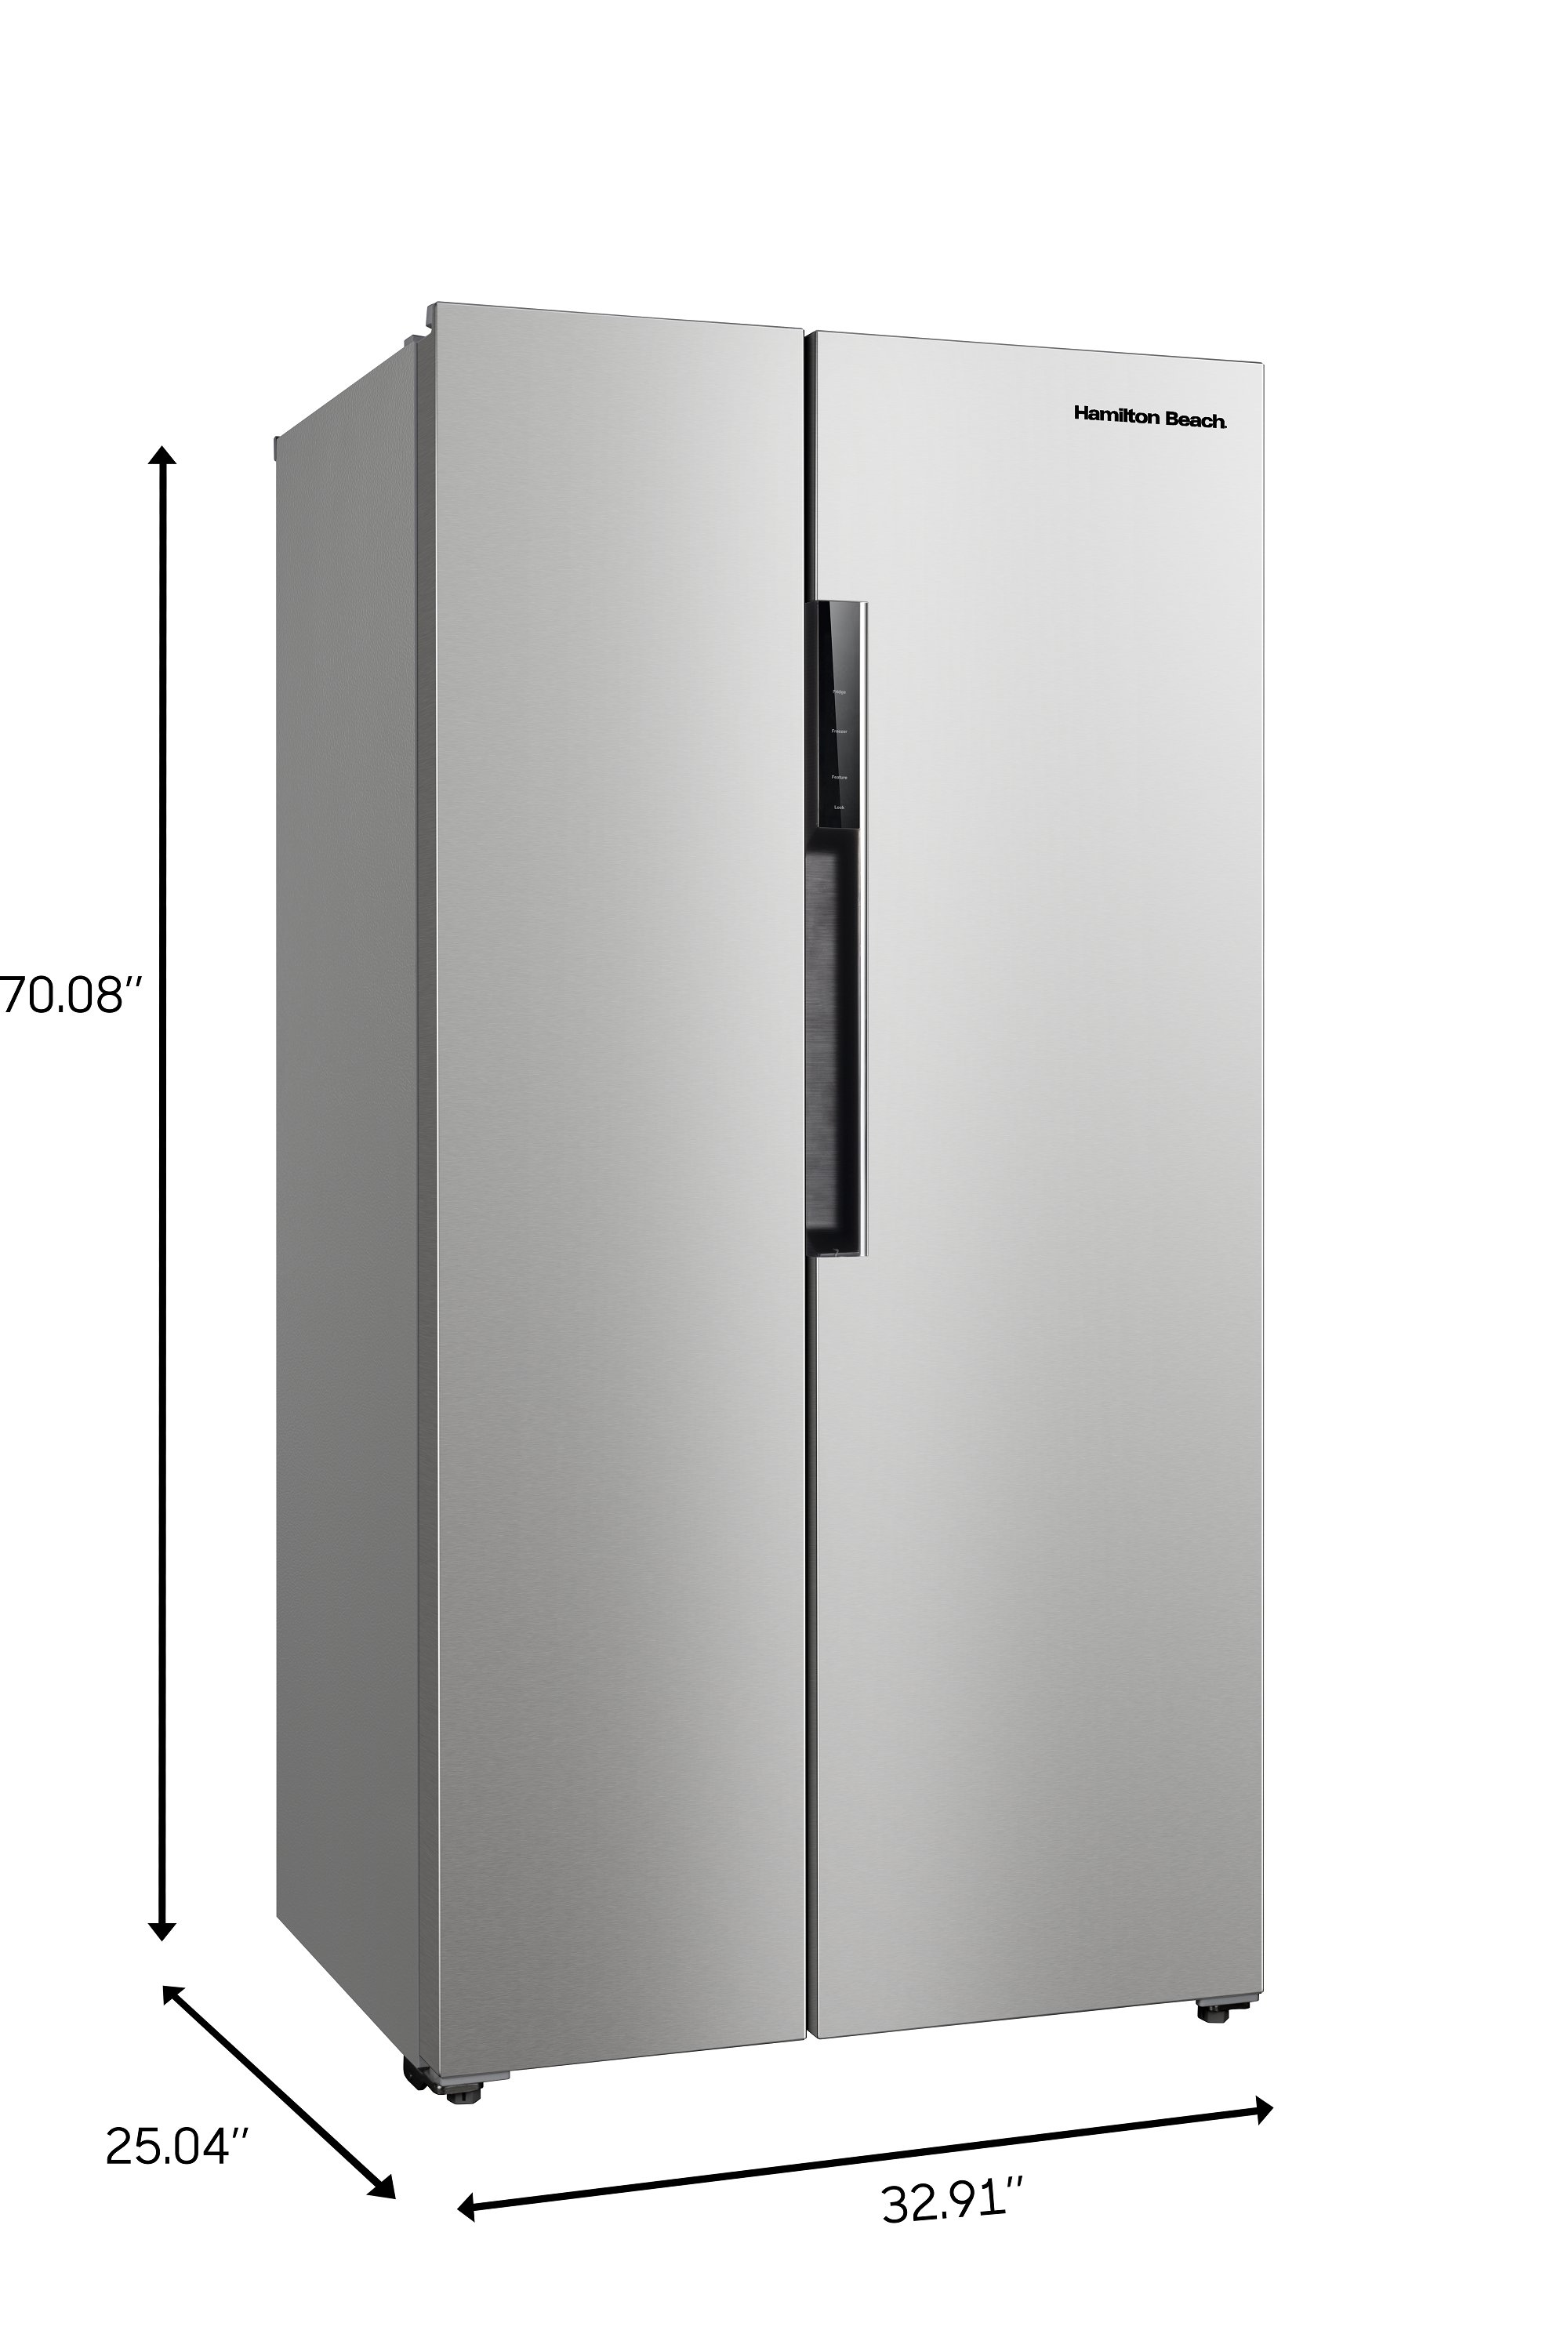 Hamilton Beach 15.6 cu. Ft. Side by side Stainless Refrigerator, Freestanding Installation, HZ8551 - image 4 of 6